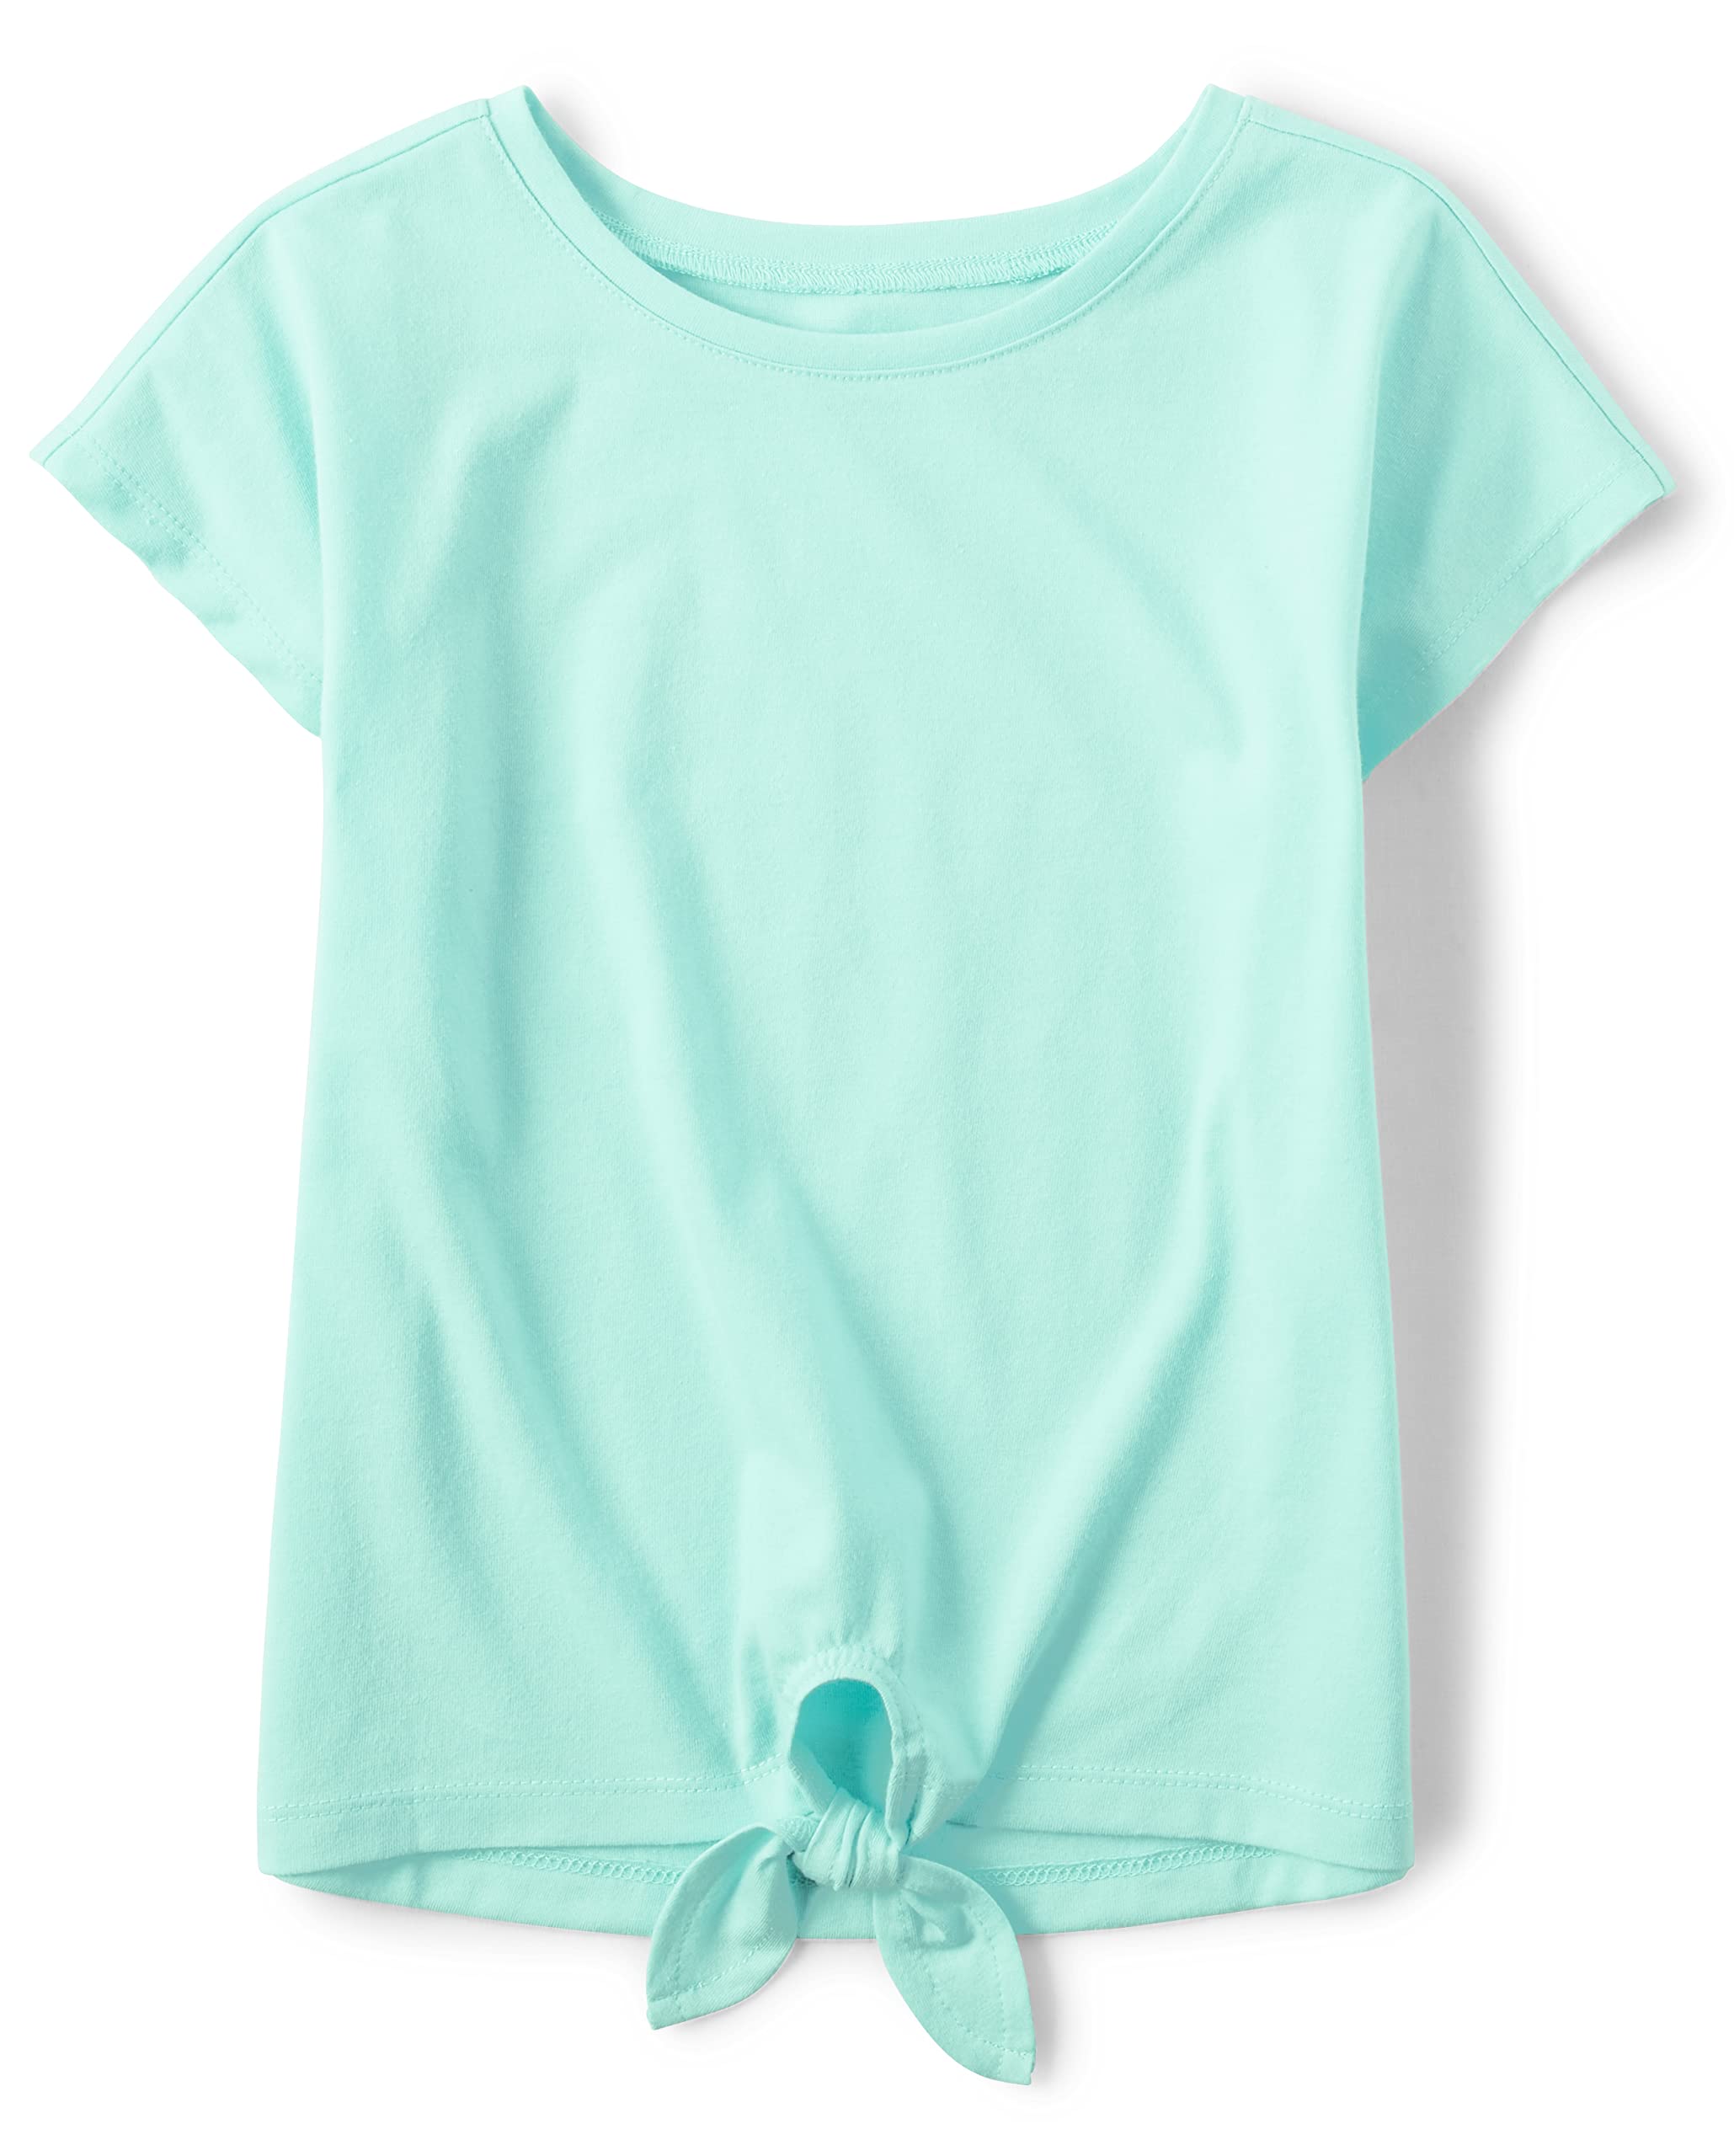 The Children's Place Girls' Short Sleeve Basic Tie Front Top